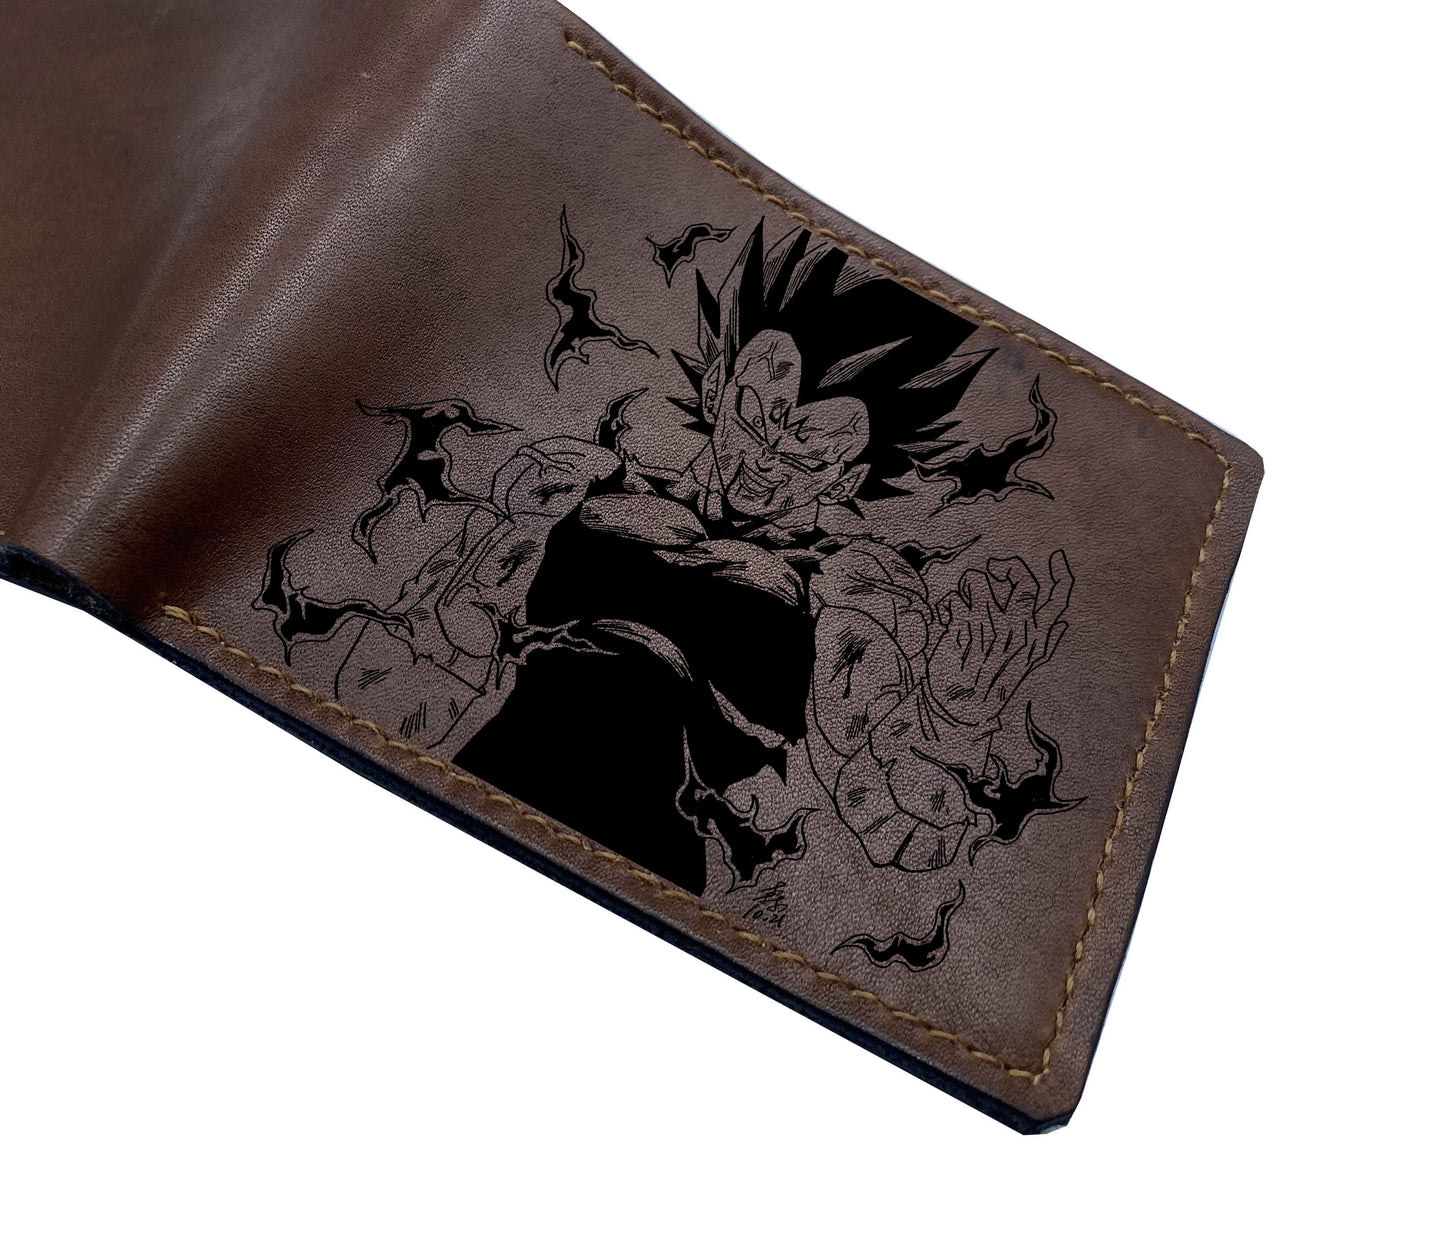 Mayan Corner - Dragon ball characters drawing leather wallet, fan art leather gift for men, wallet for him, leather anniversary present ideas - Super Villains monster